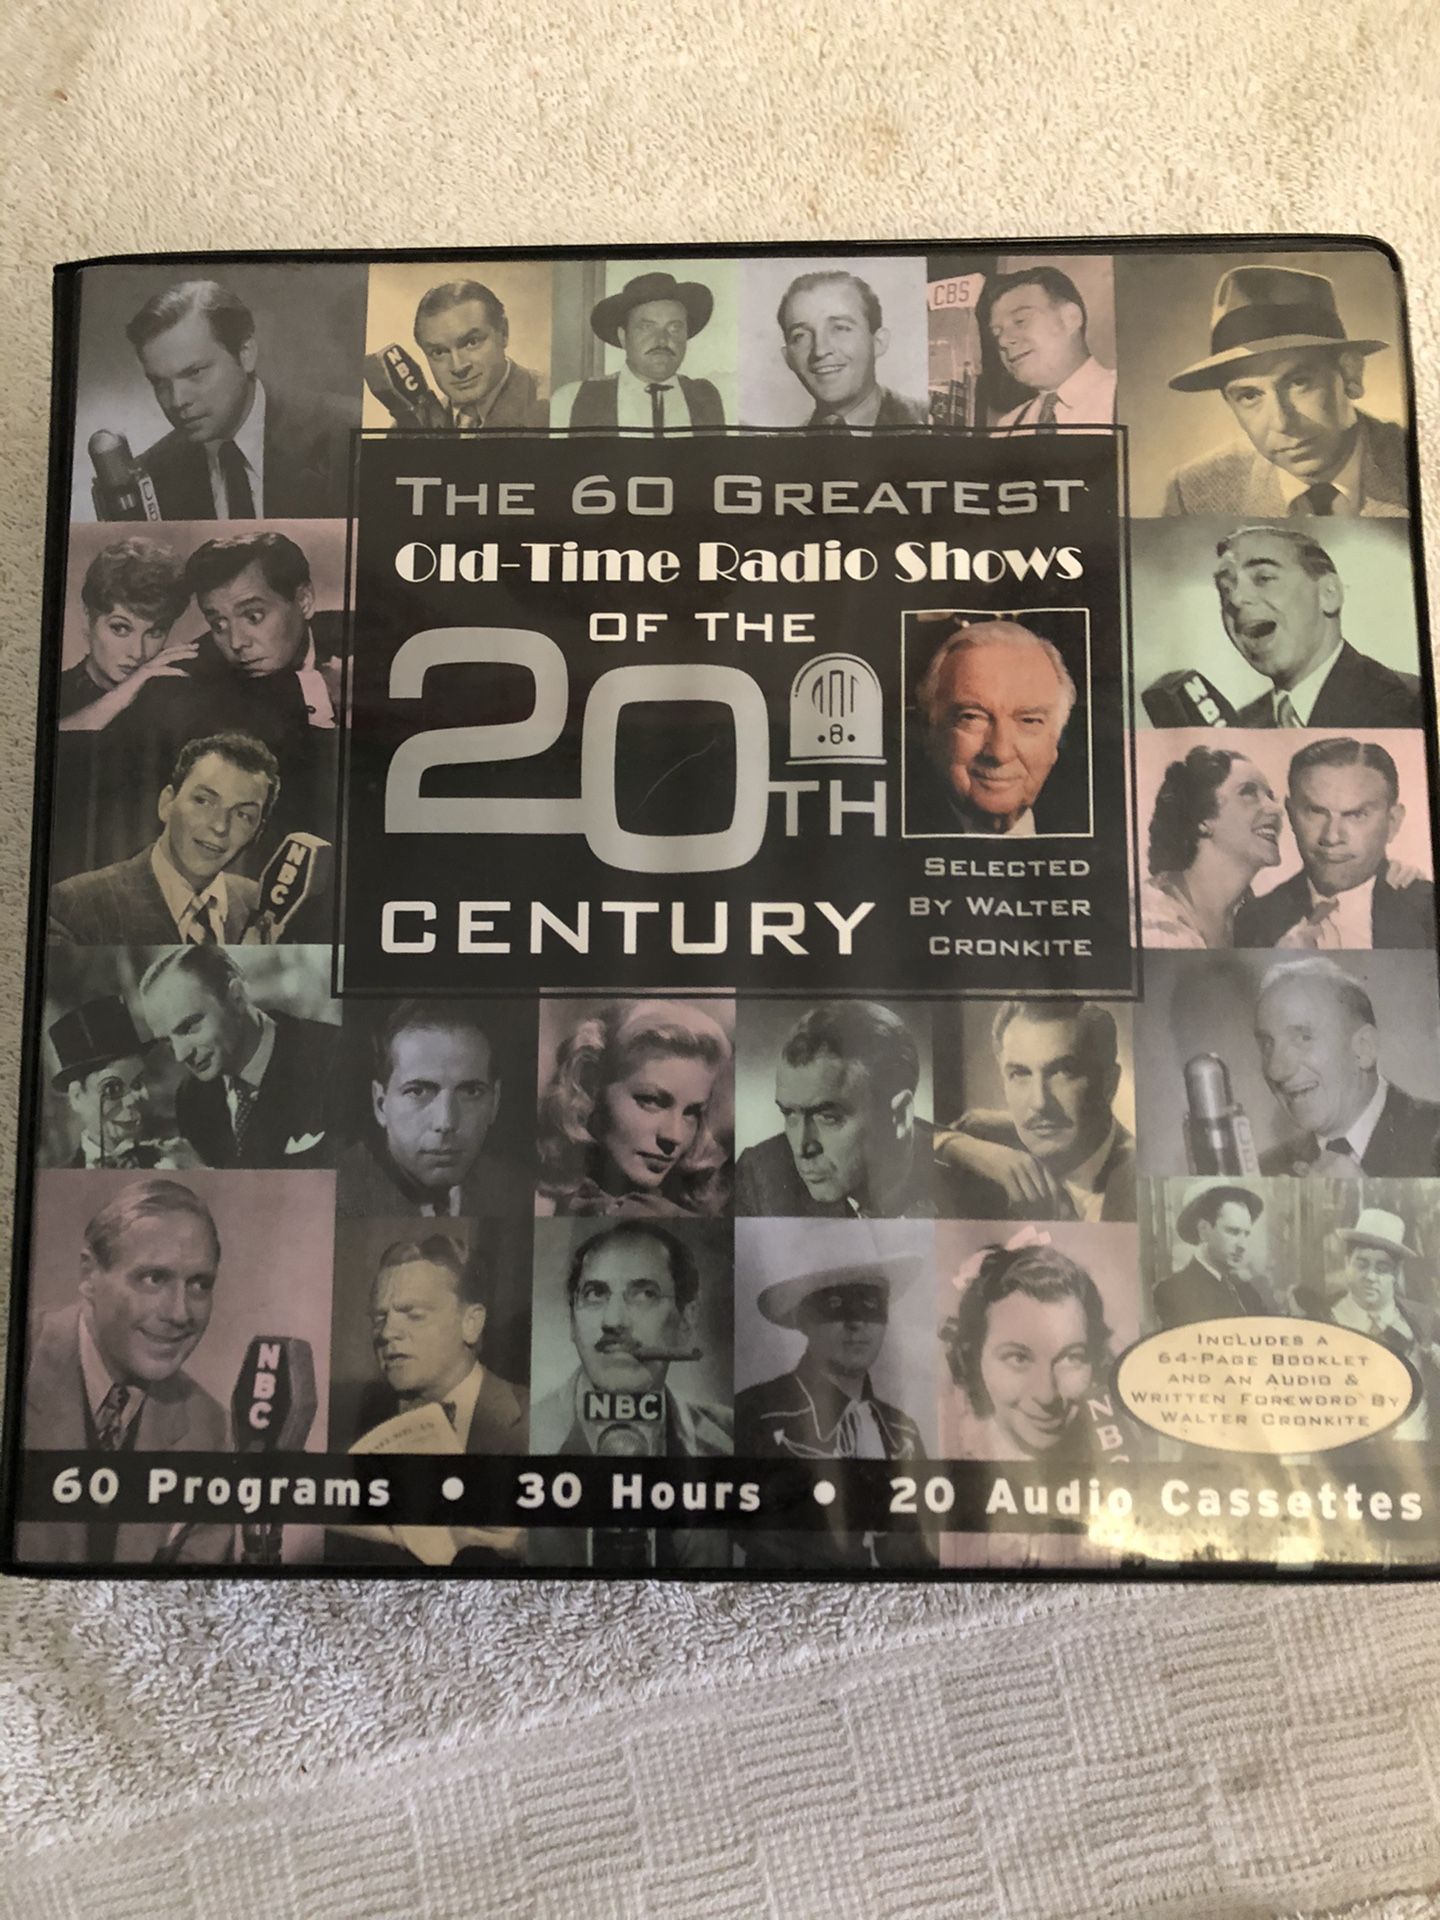 Walter Cronkite: The 60 Greatest Old-Time Radio Shows of the 20th Century